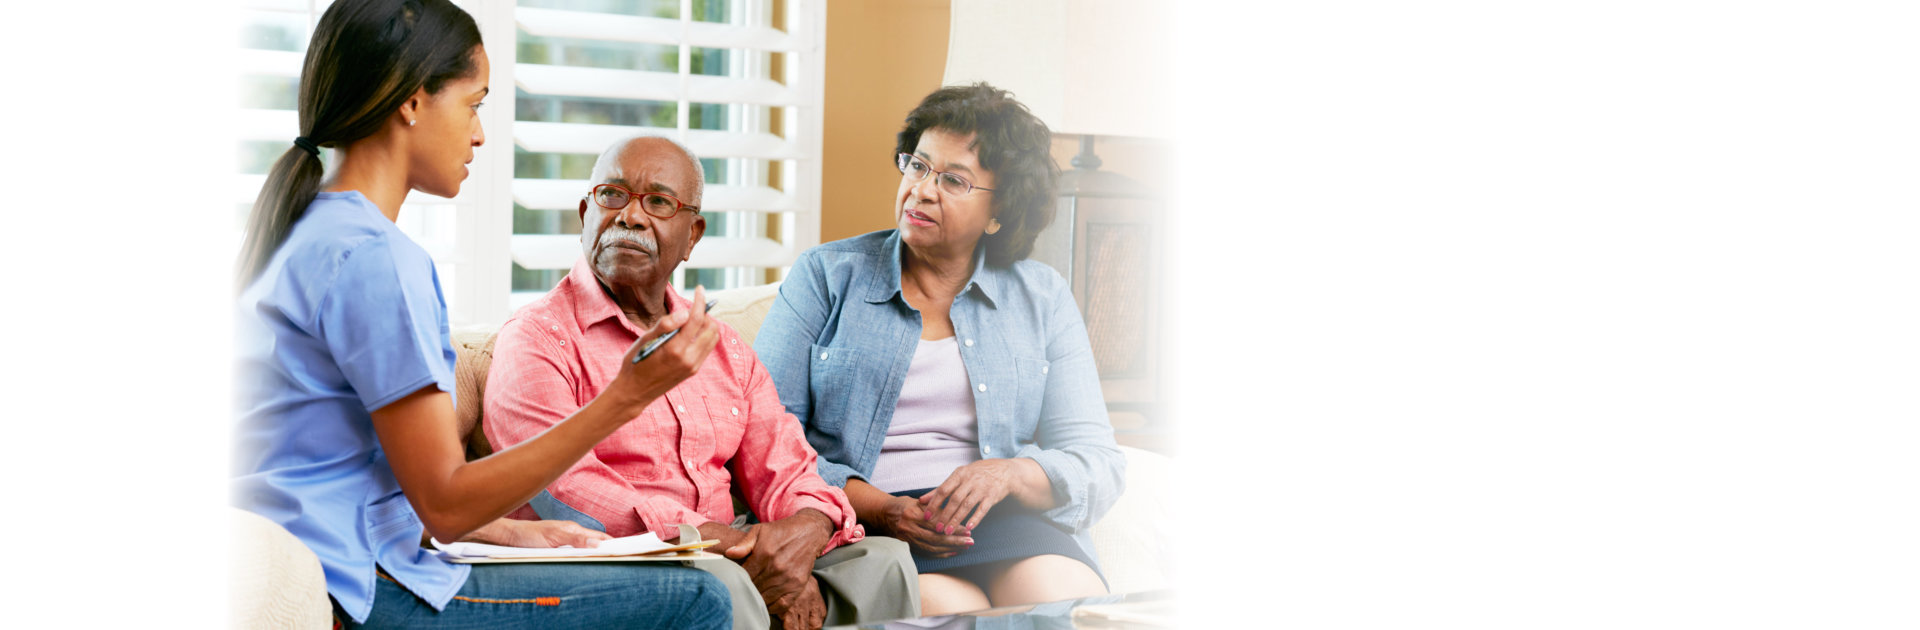 caregiver counseling the seniors